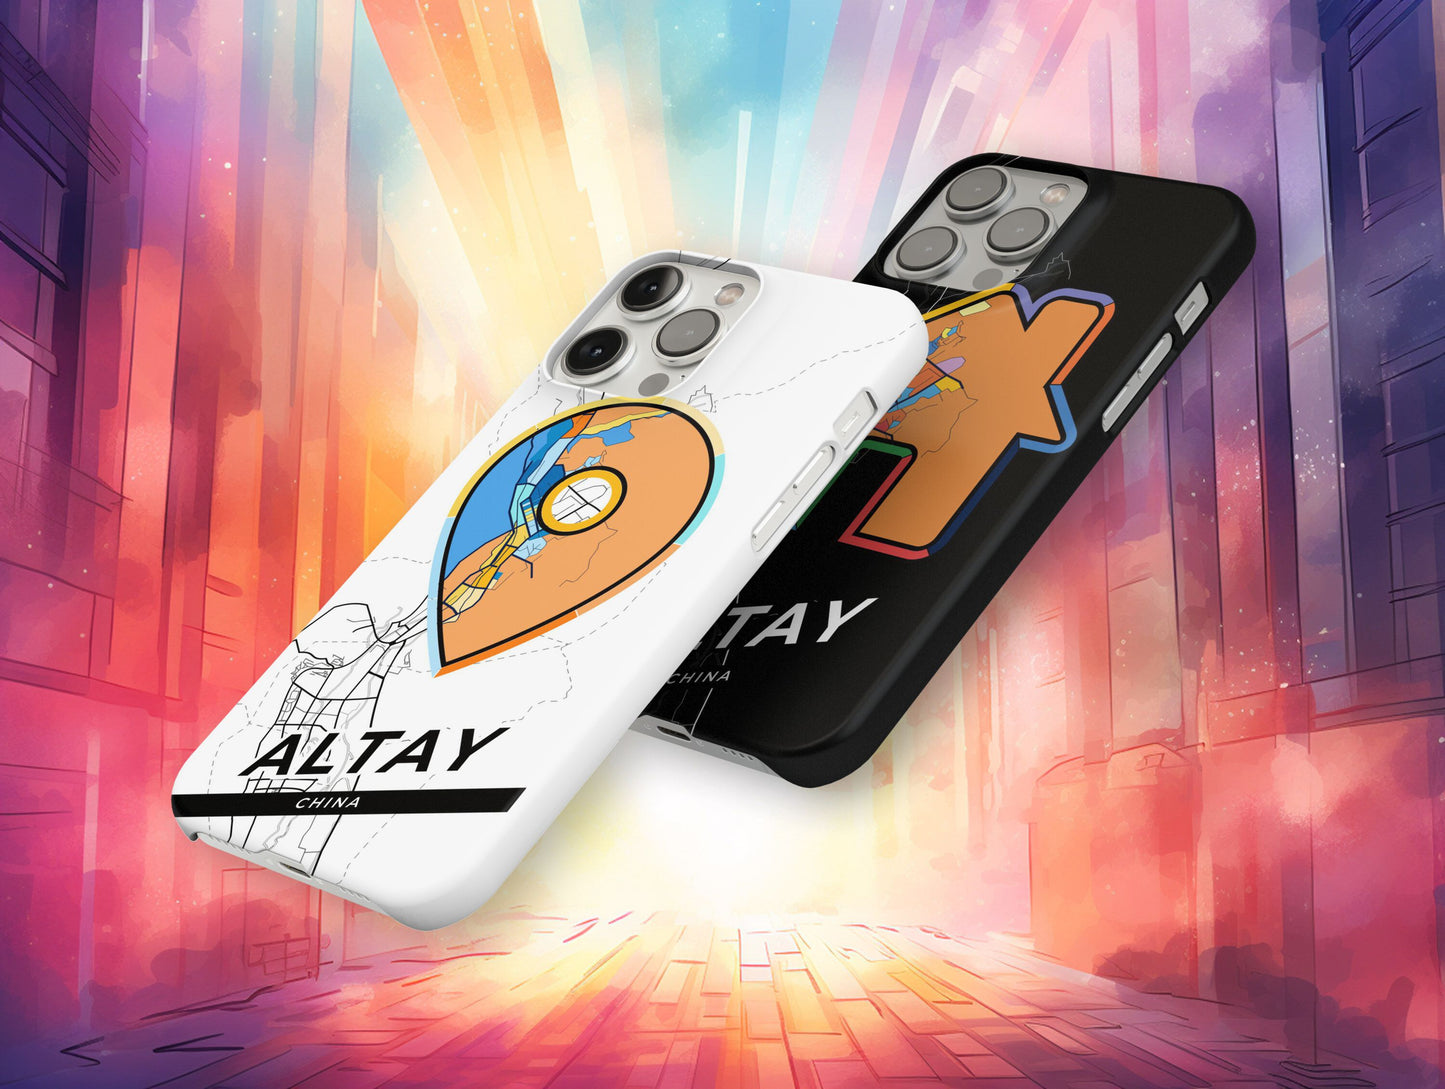 Altay China slim phone case with colorful icon. Birthday, wedding or housewarming gift. Couple match cases.